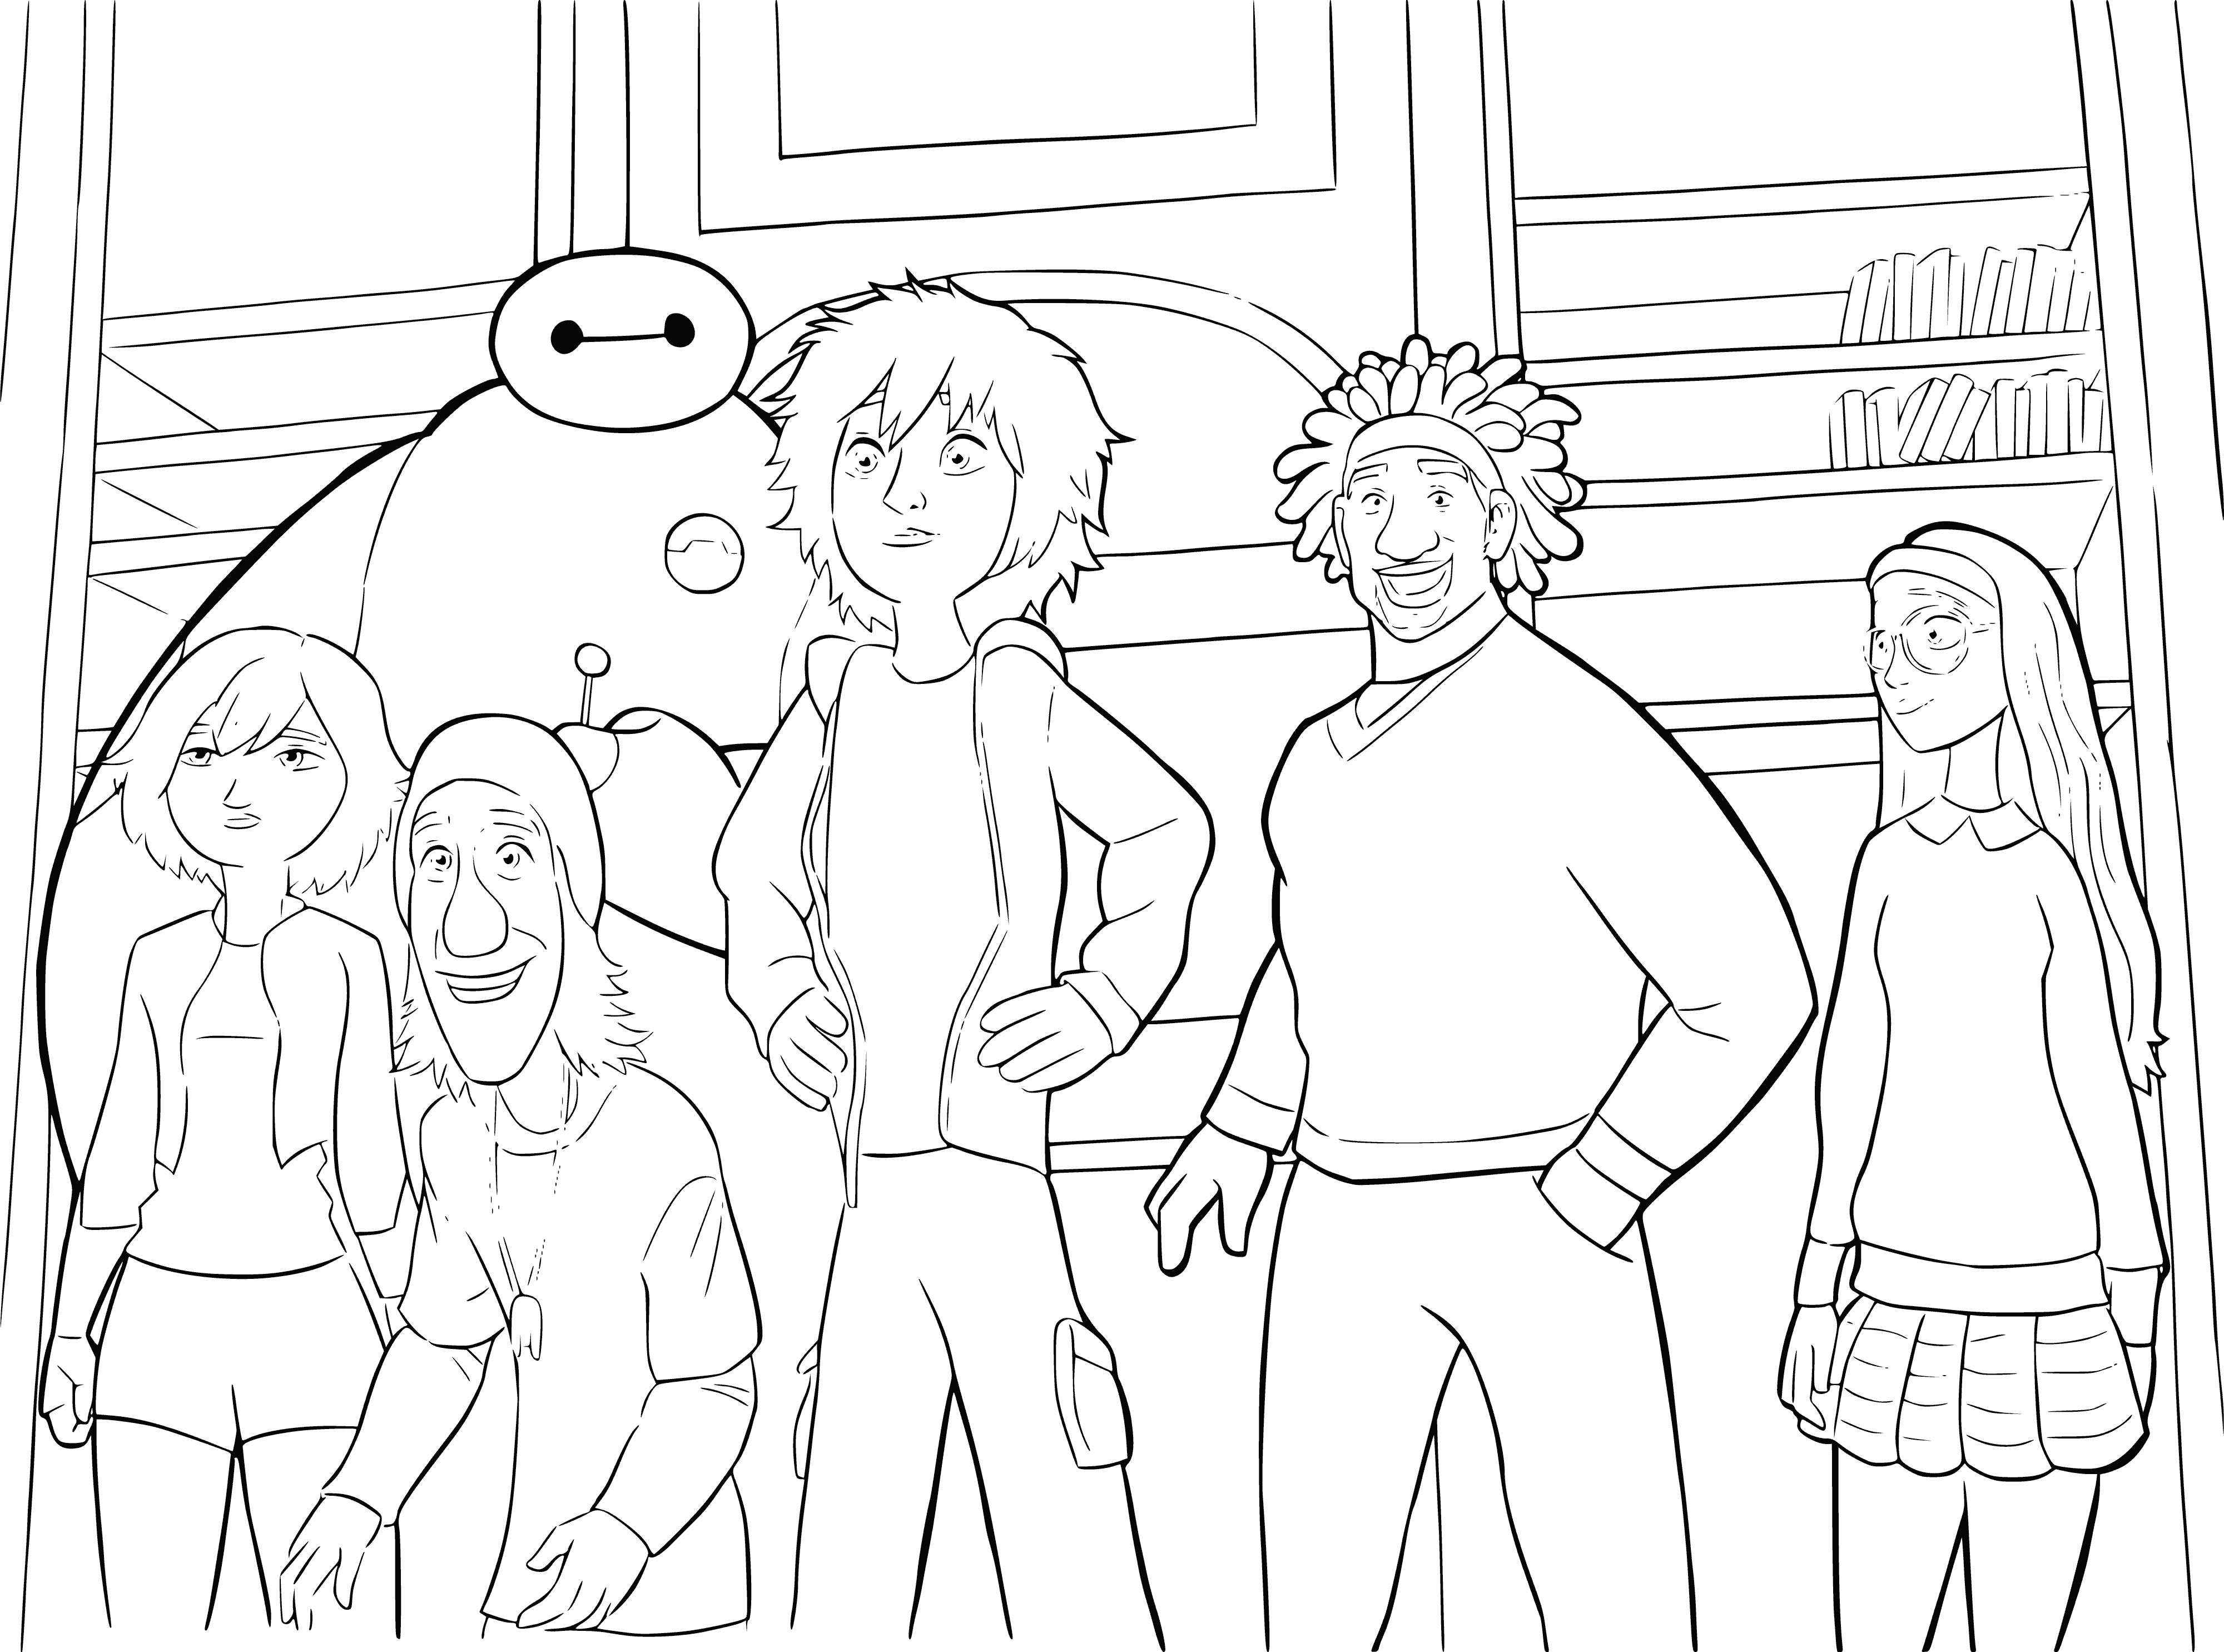 coloring page: A group of different-sized superheroes stand together on a city street looking up at something in the sky, wearing serious expressions.